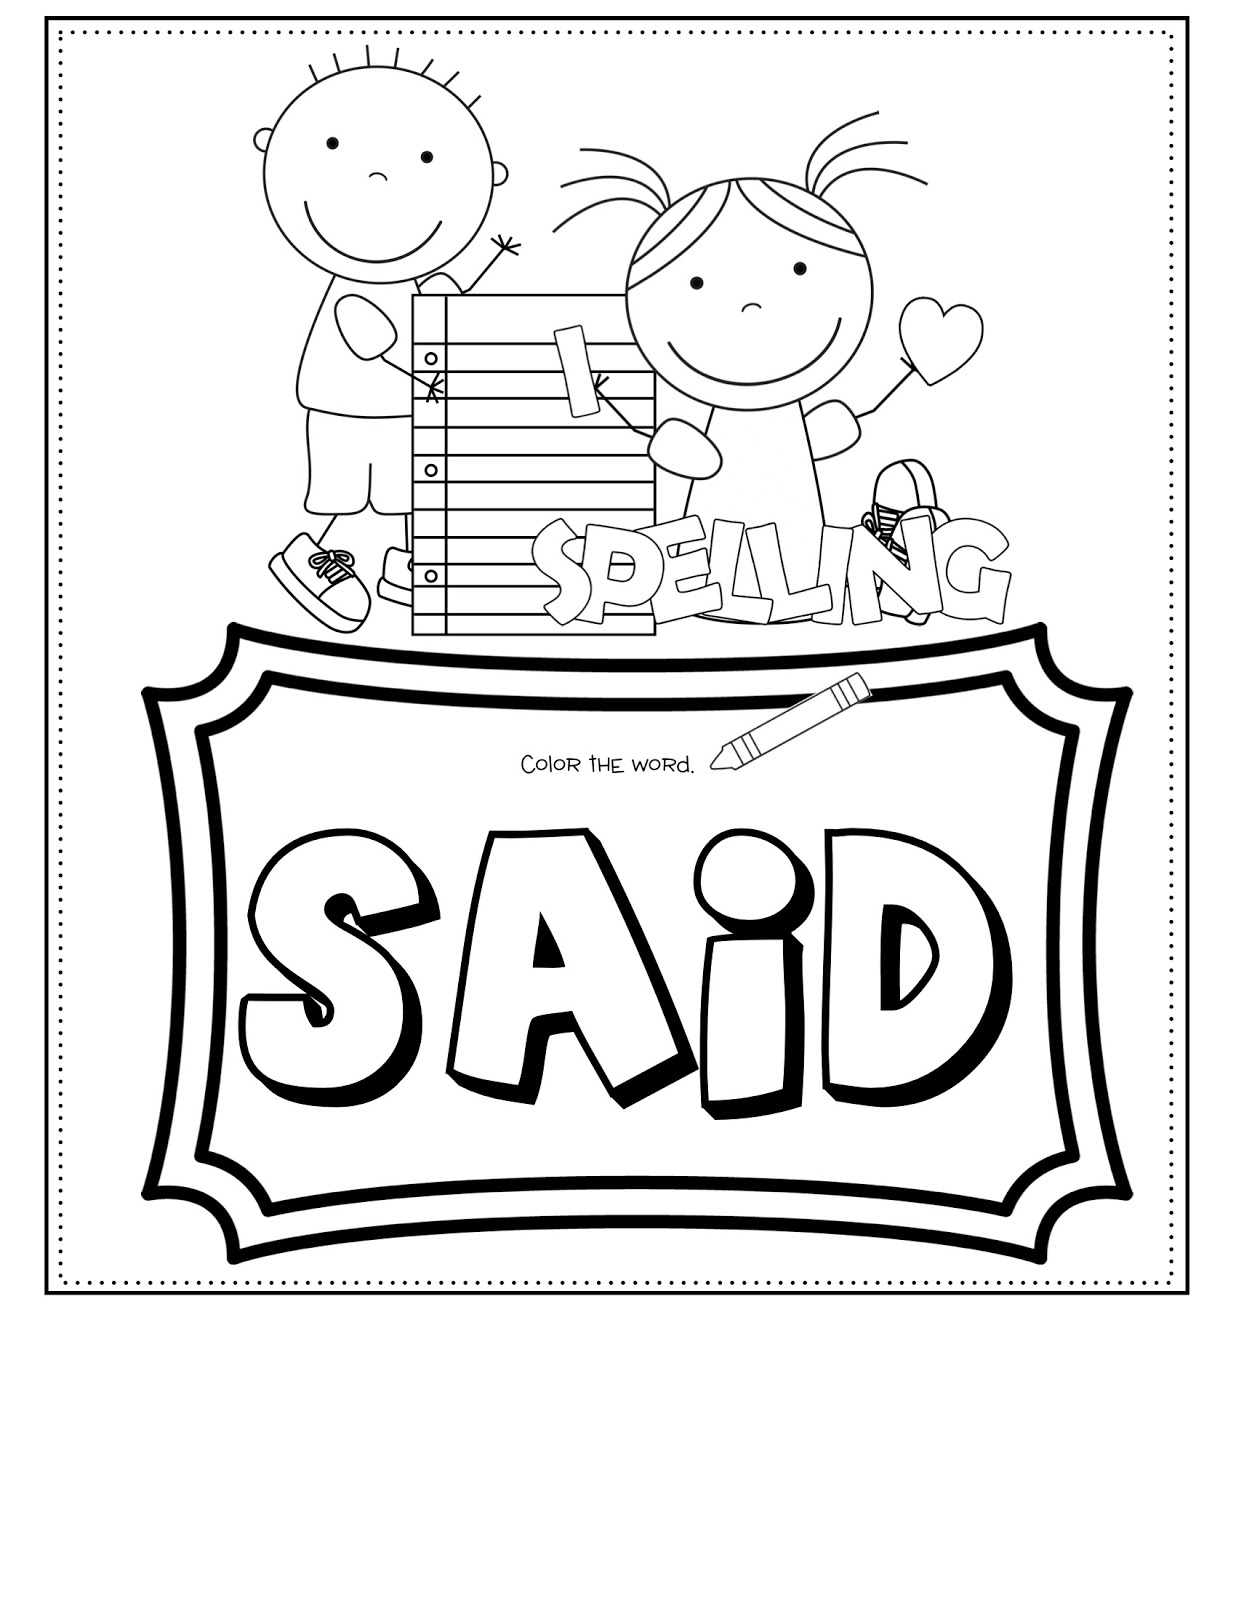 Workbook Sight sight word see Multi Cloud: Word worksheets Task Lesson The